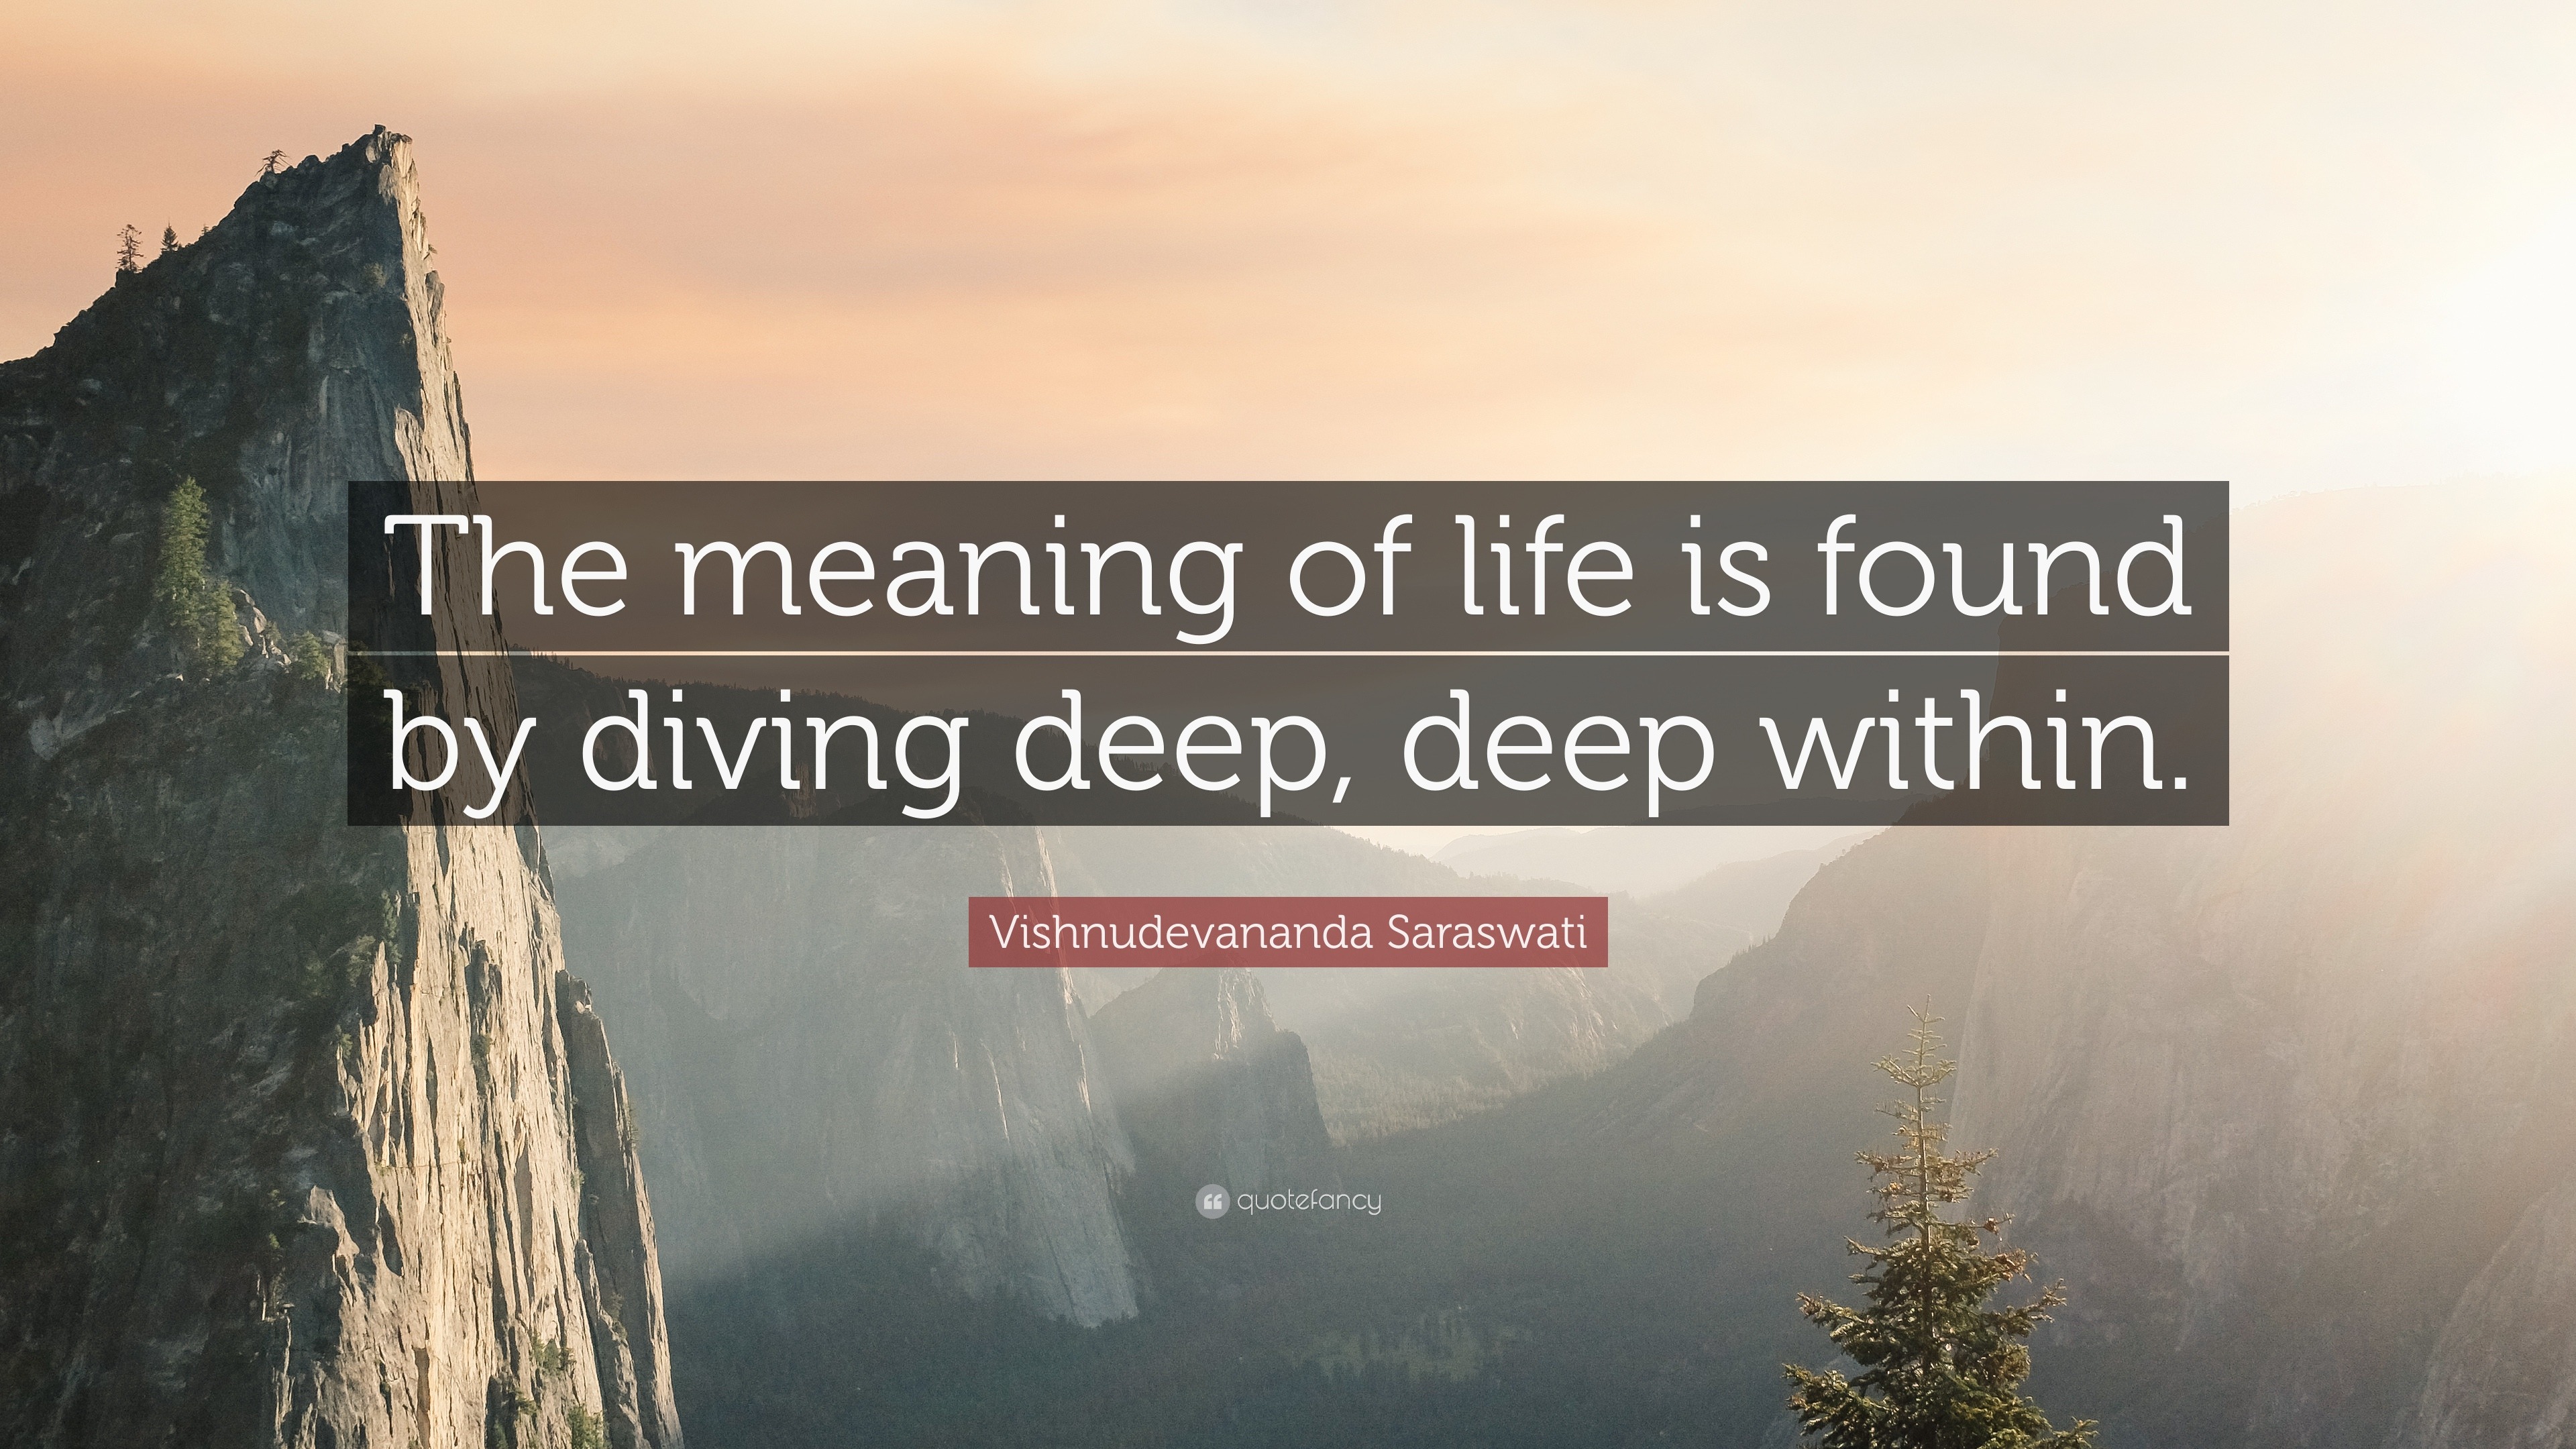 Vish vananda Saraswati Quote “The meaning of life is found by diving deep deep